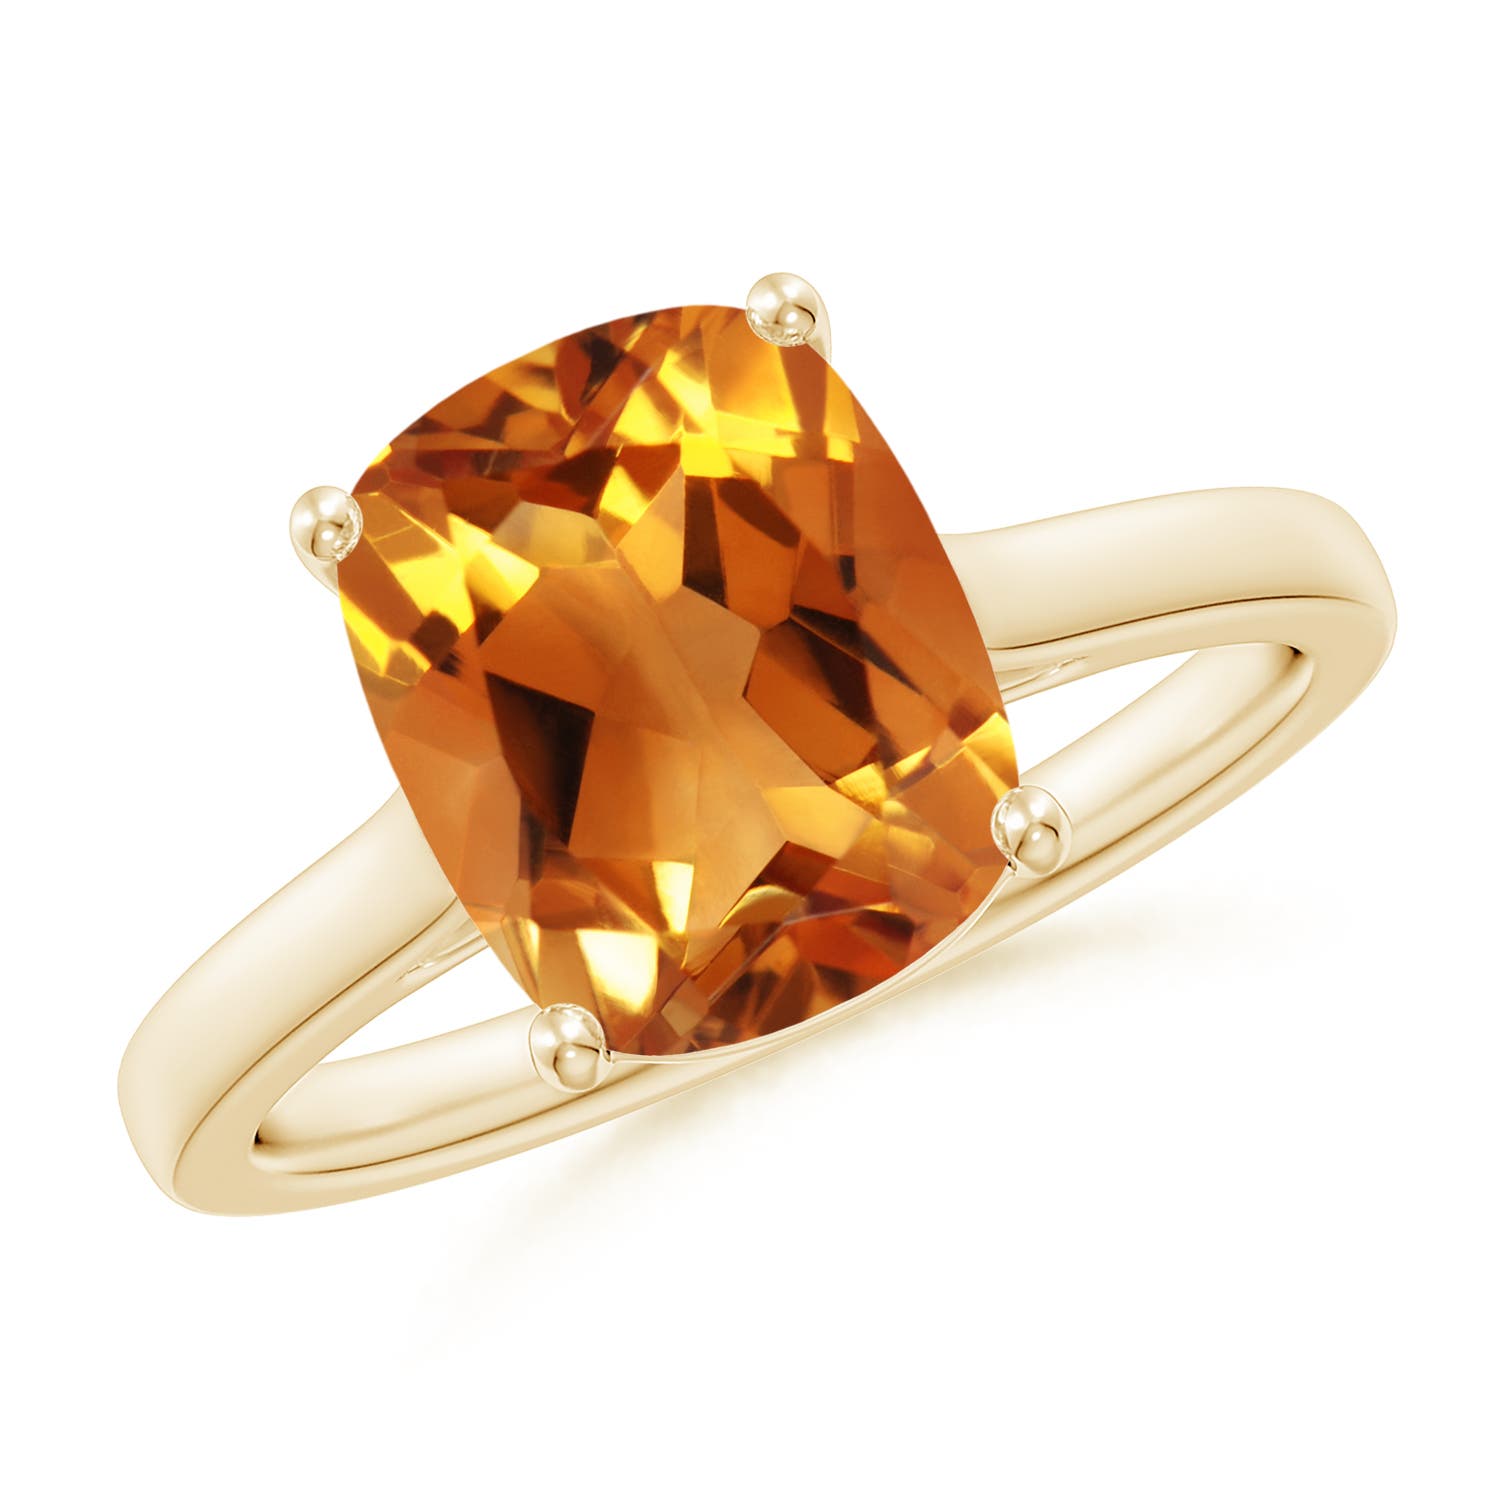 AAA - Citrine / 2.67 CT / 14 KT Yellow Gold